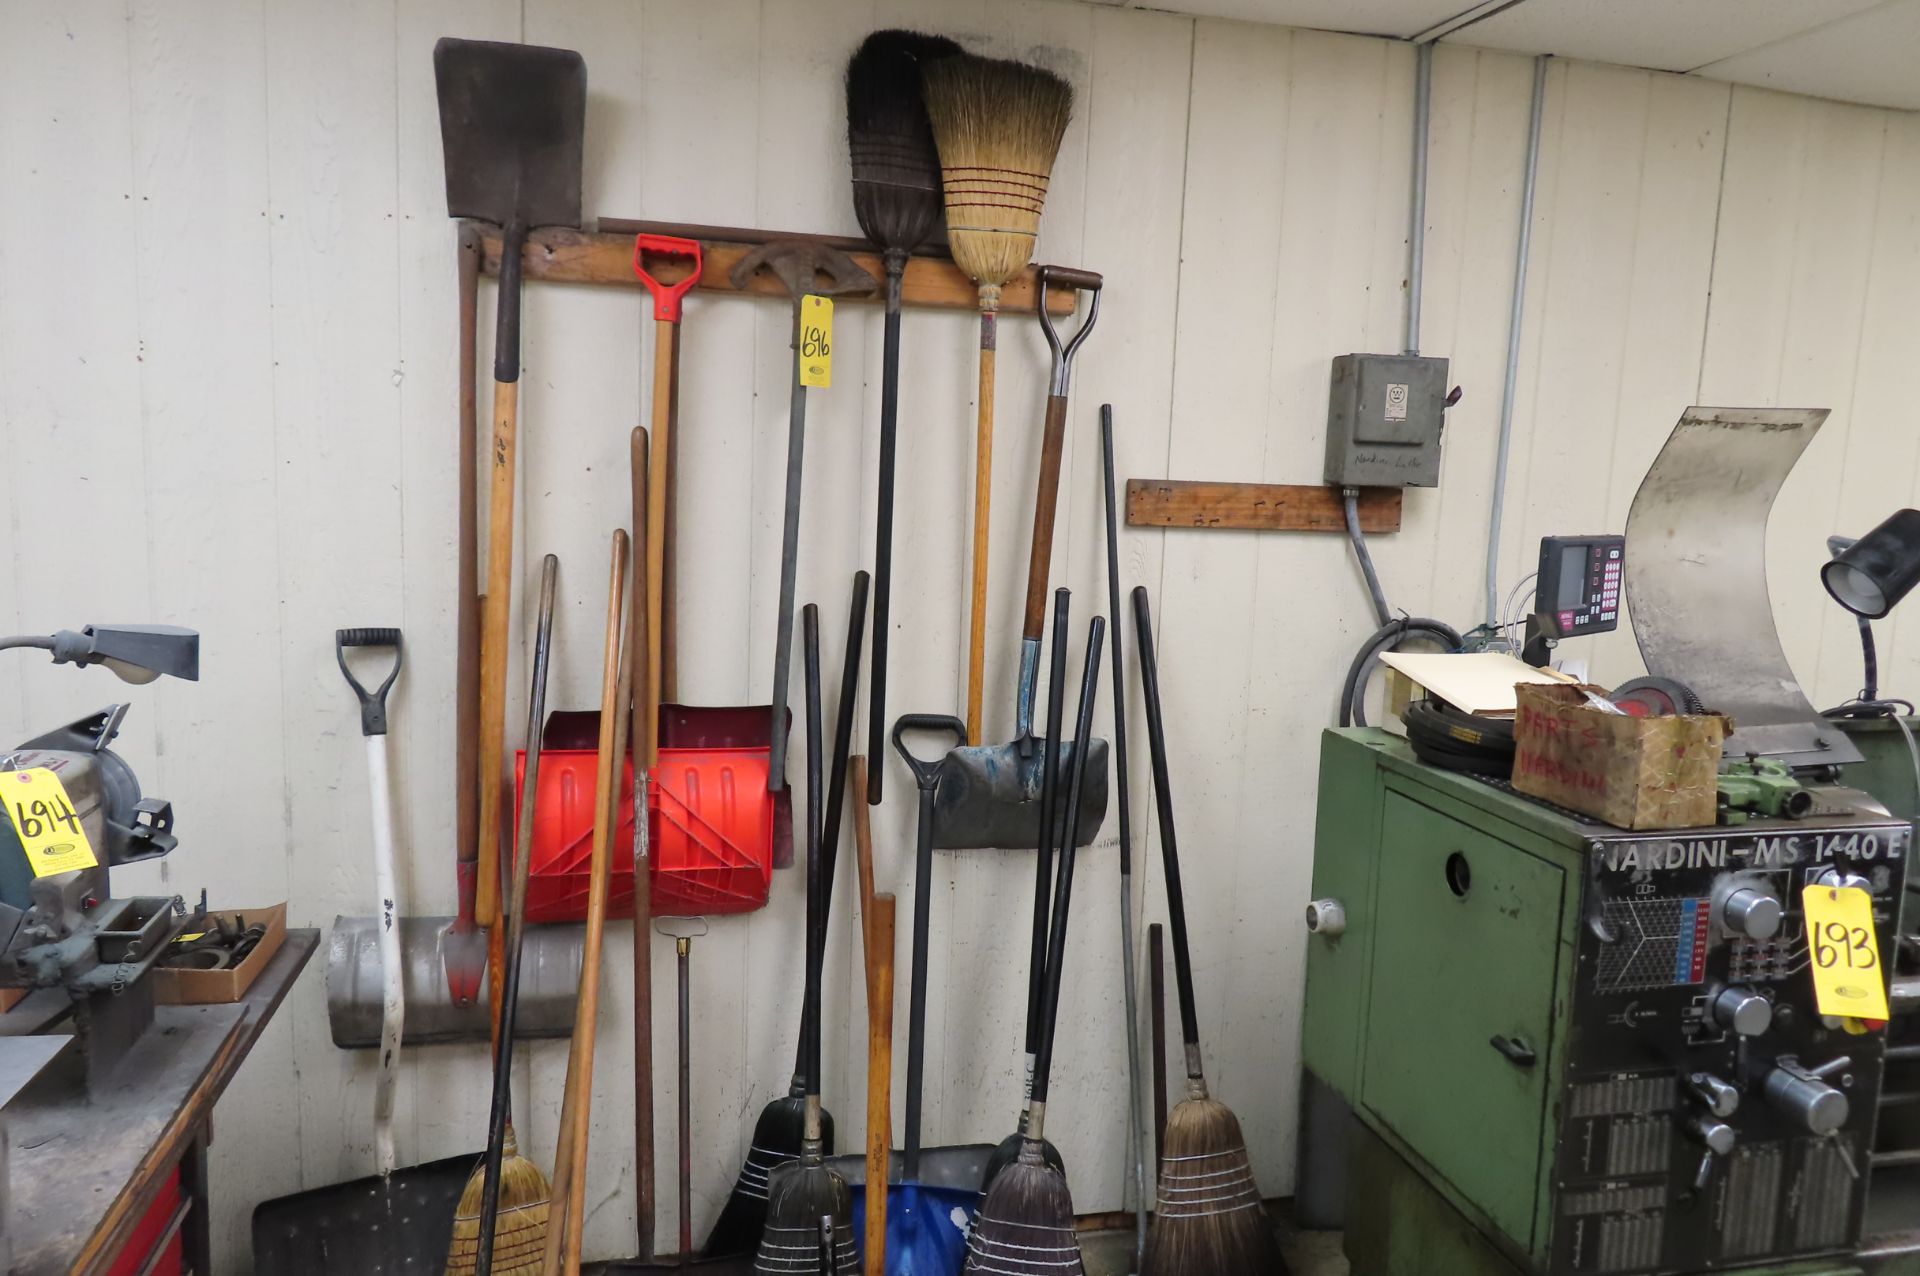 ASSORTED BROOMS AND SHOVELS